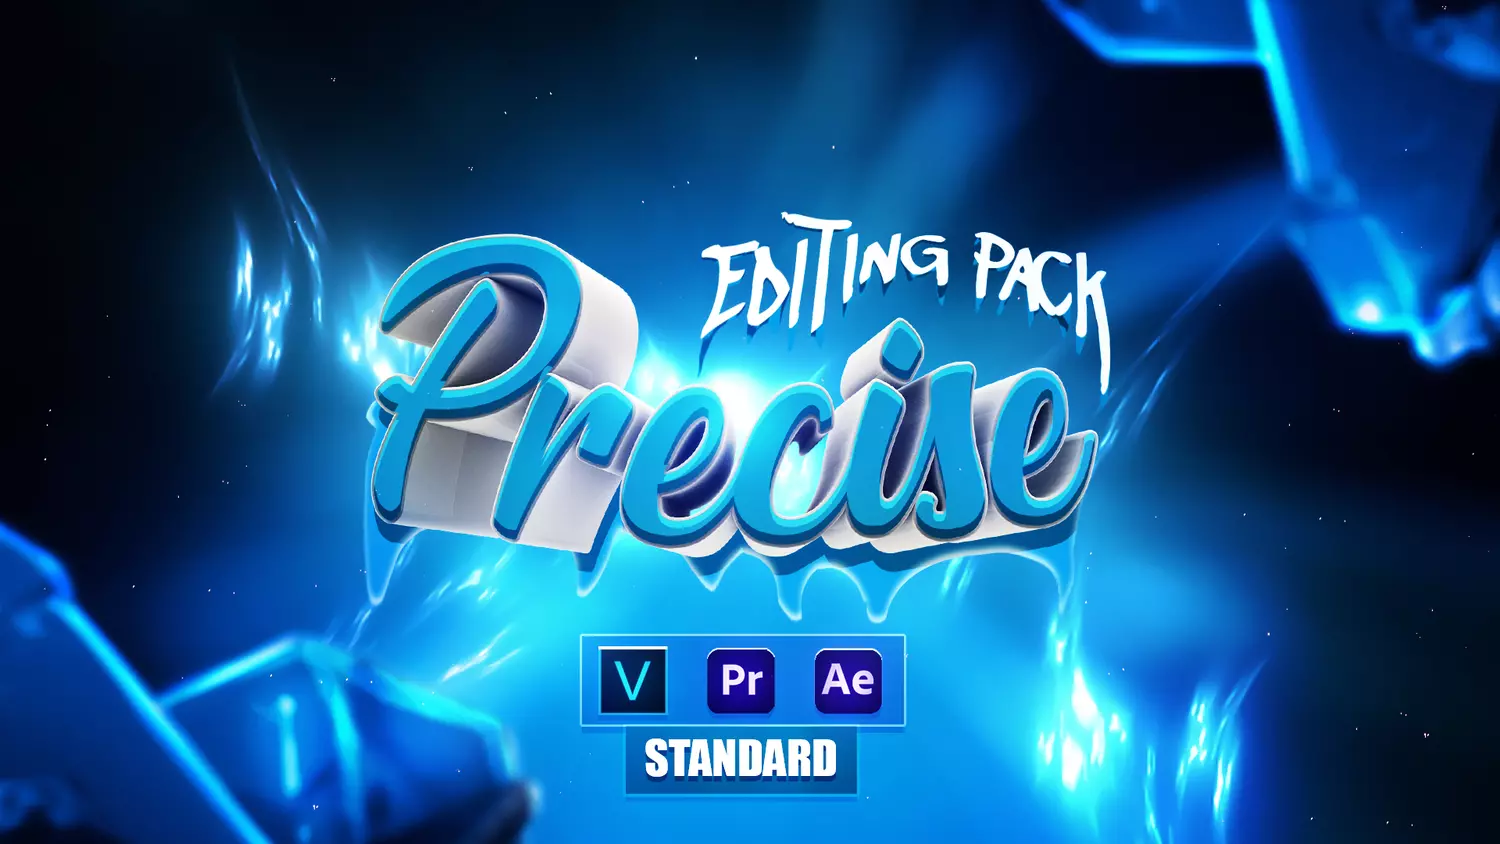 Precise Editing Pack (STANDARD EDITION) link image